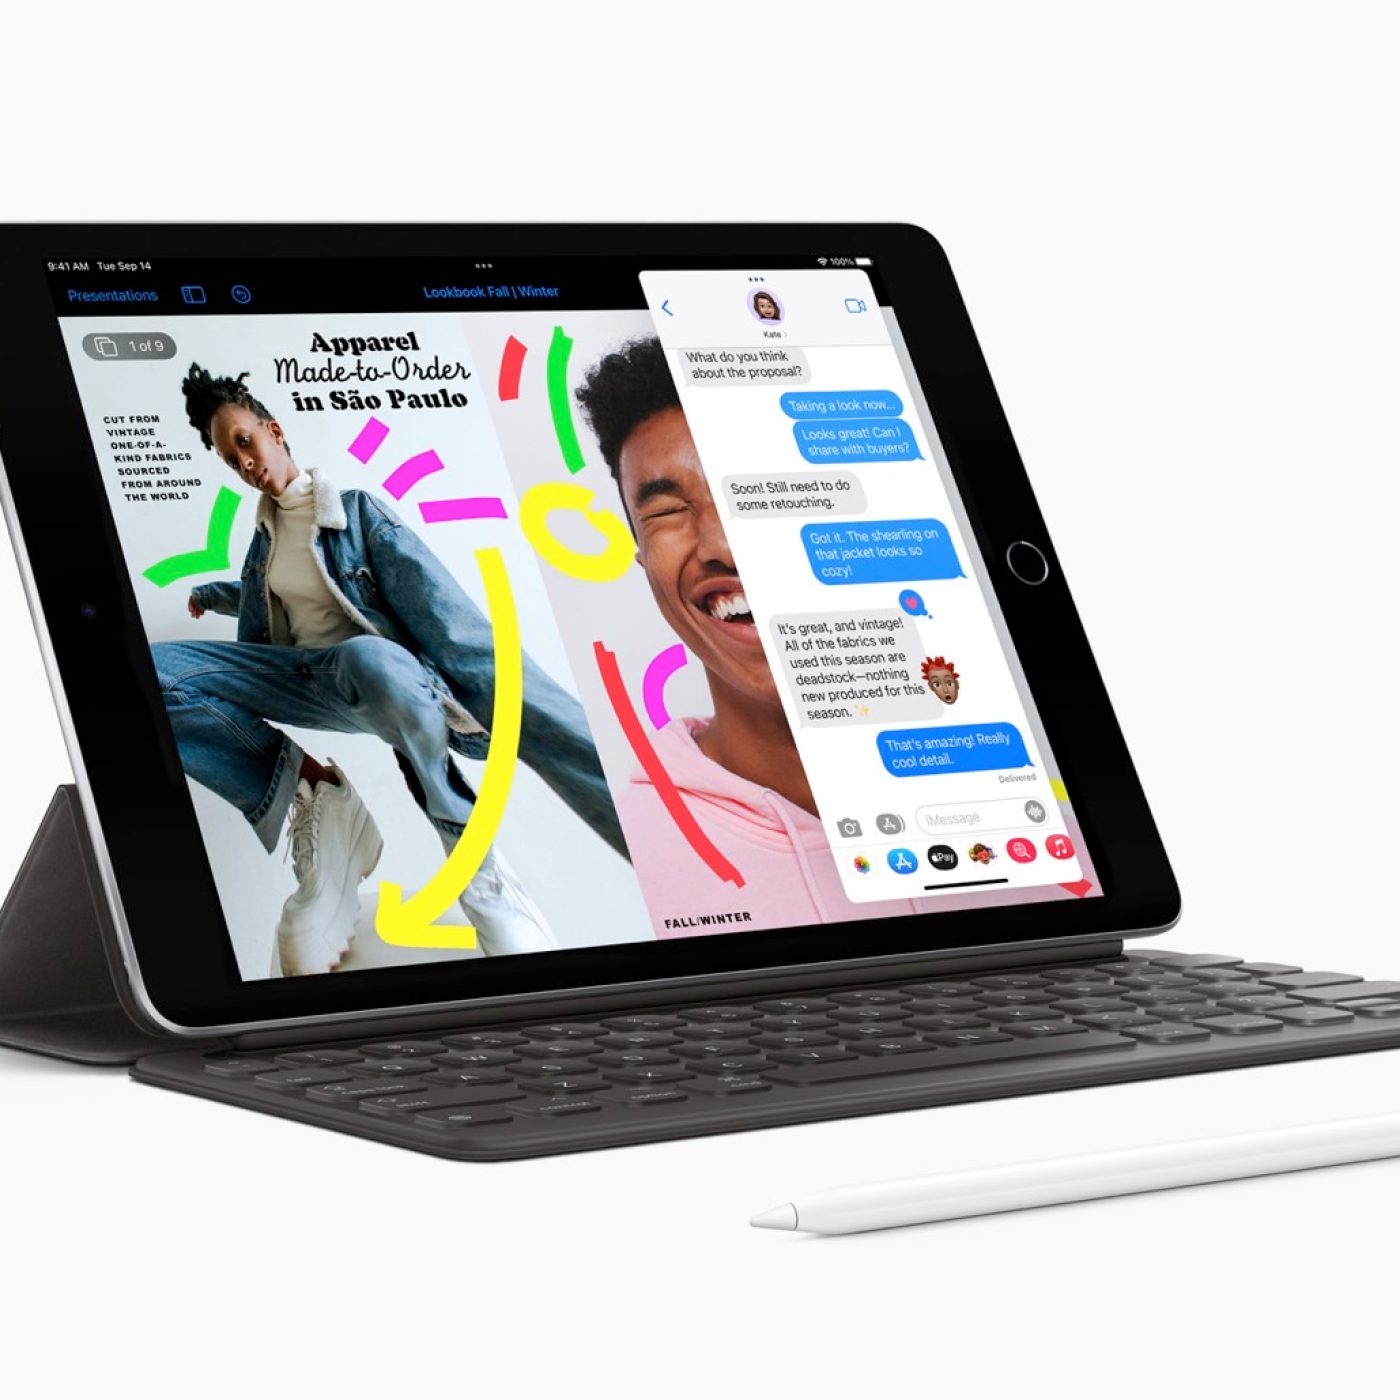 iPad mini 7 may only get a new chip in spec-bump update